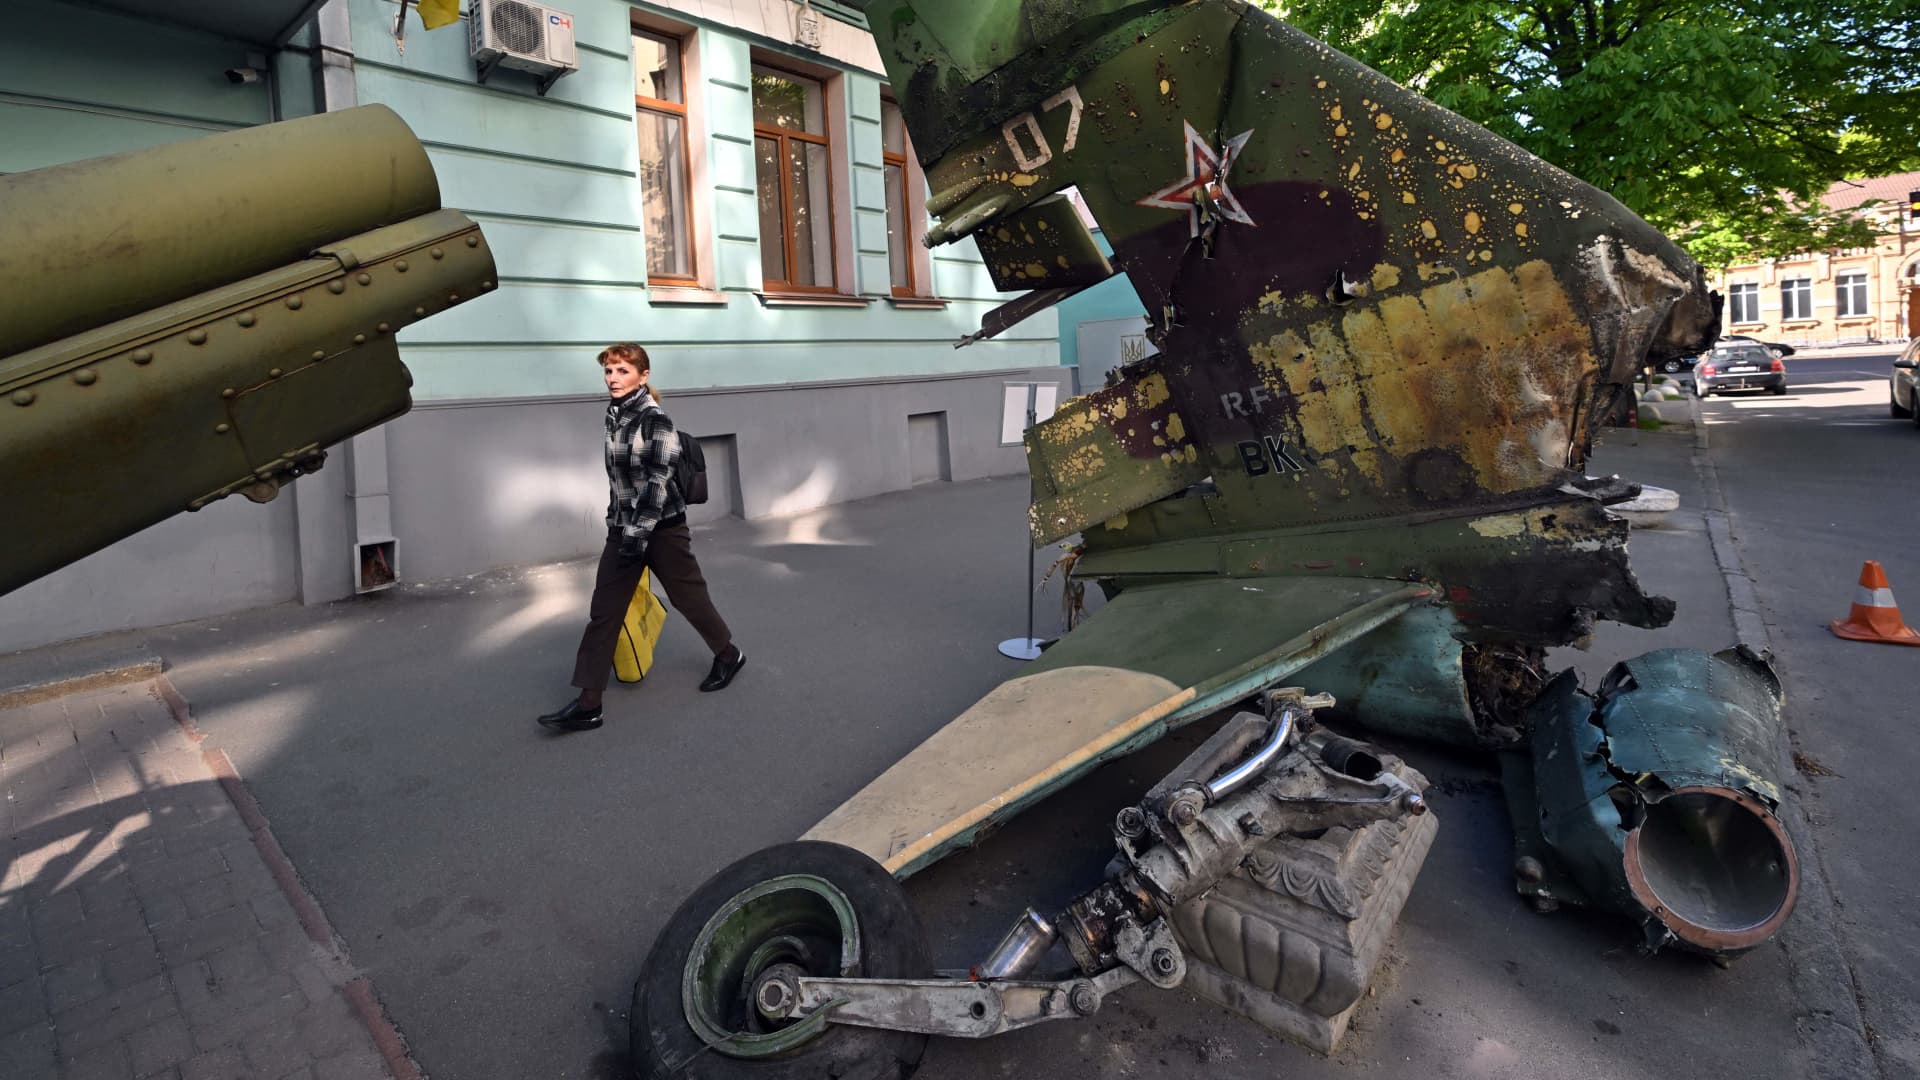 A pedestrian passes in front of the wreckage of a Russian plane outside the National Museum of Military History of Ukraine in Kyiv on May 5, 2022. - The exhibit's curator Pavlo Netesov hopes the freshly destroyed equipment will serve as a visible reminder of the war's toll to residents in downtown Kyiv -- who have been largely spared from the harsh ground fighting that has erupted elsewhere across the country.